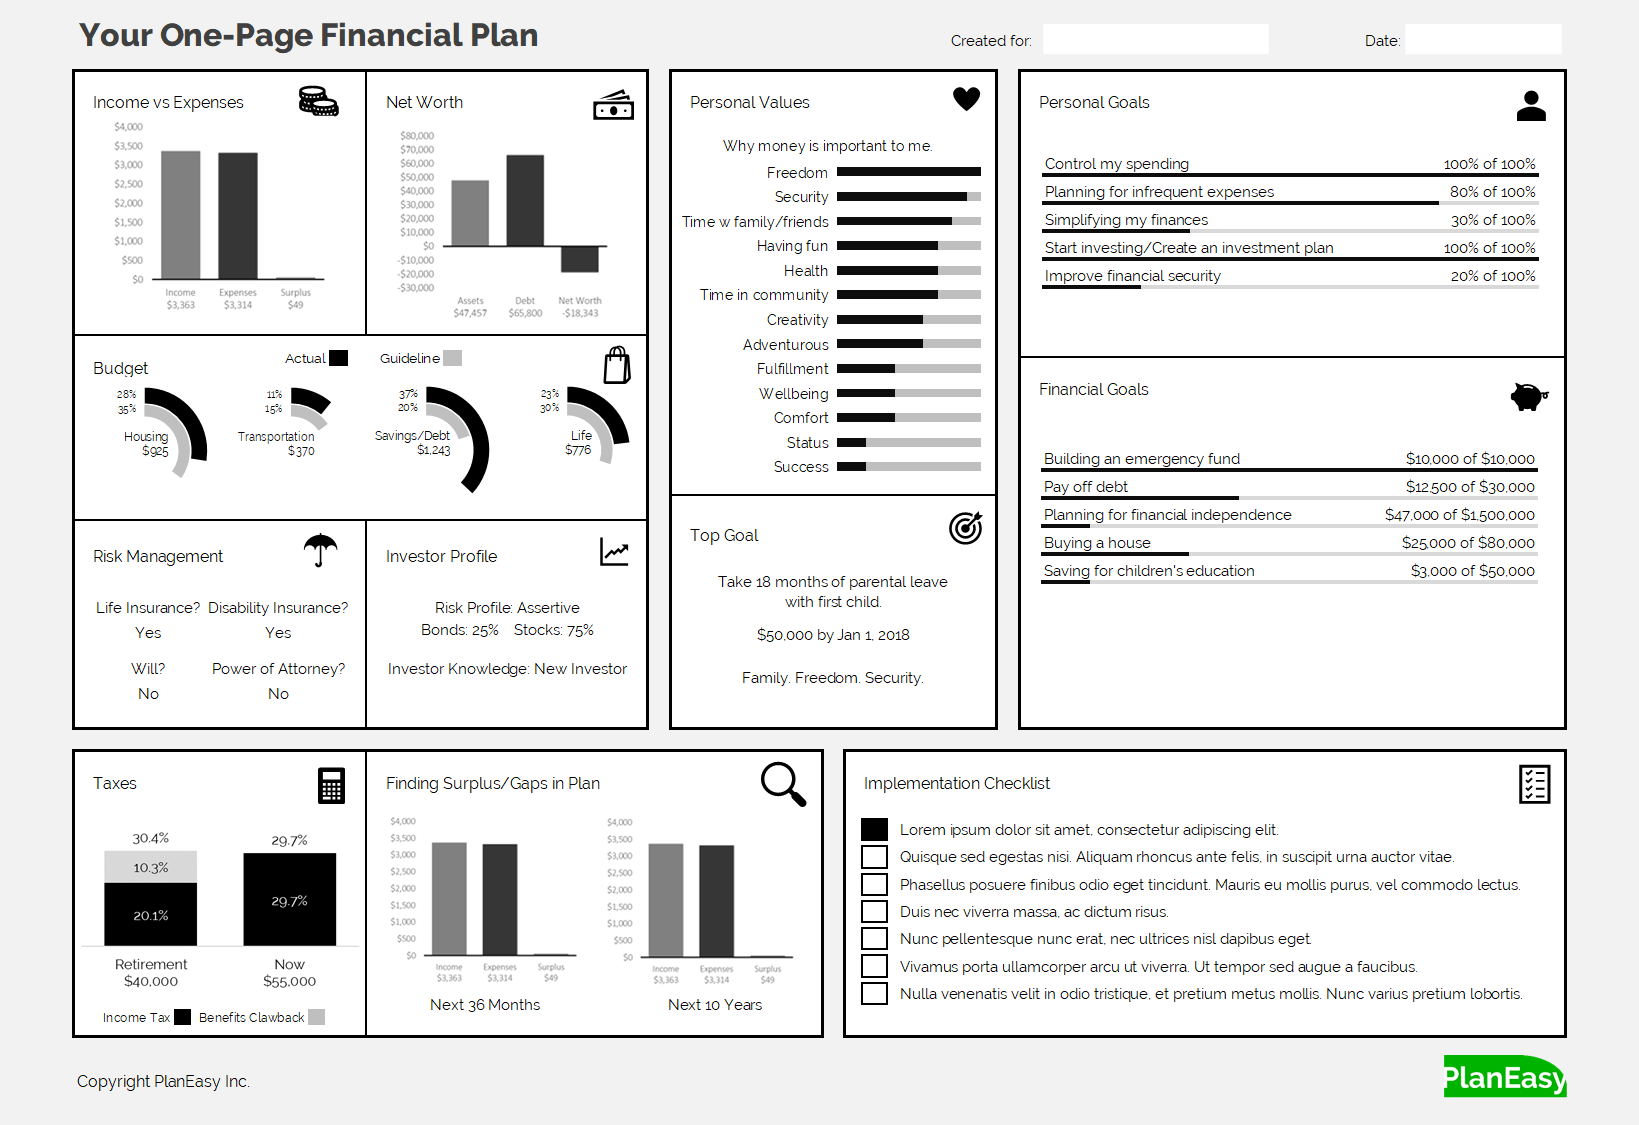 One Page Financial Plan Example Complete 20180223 PlanEasy